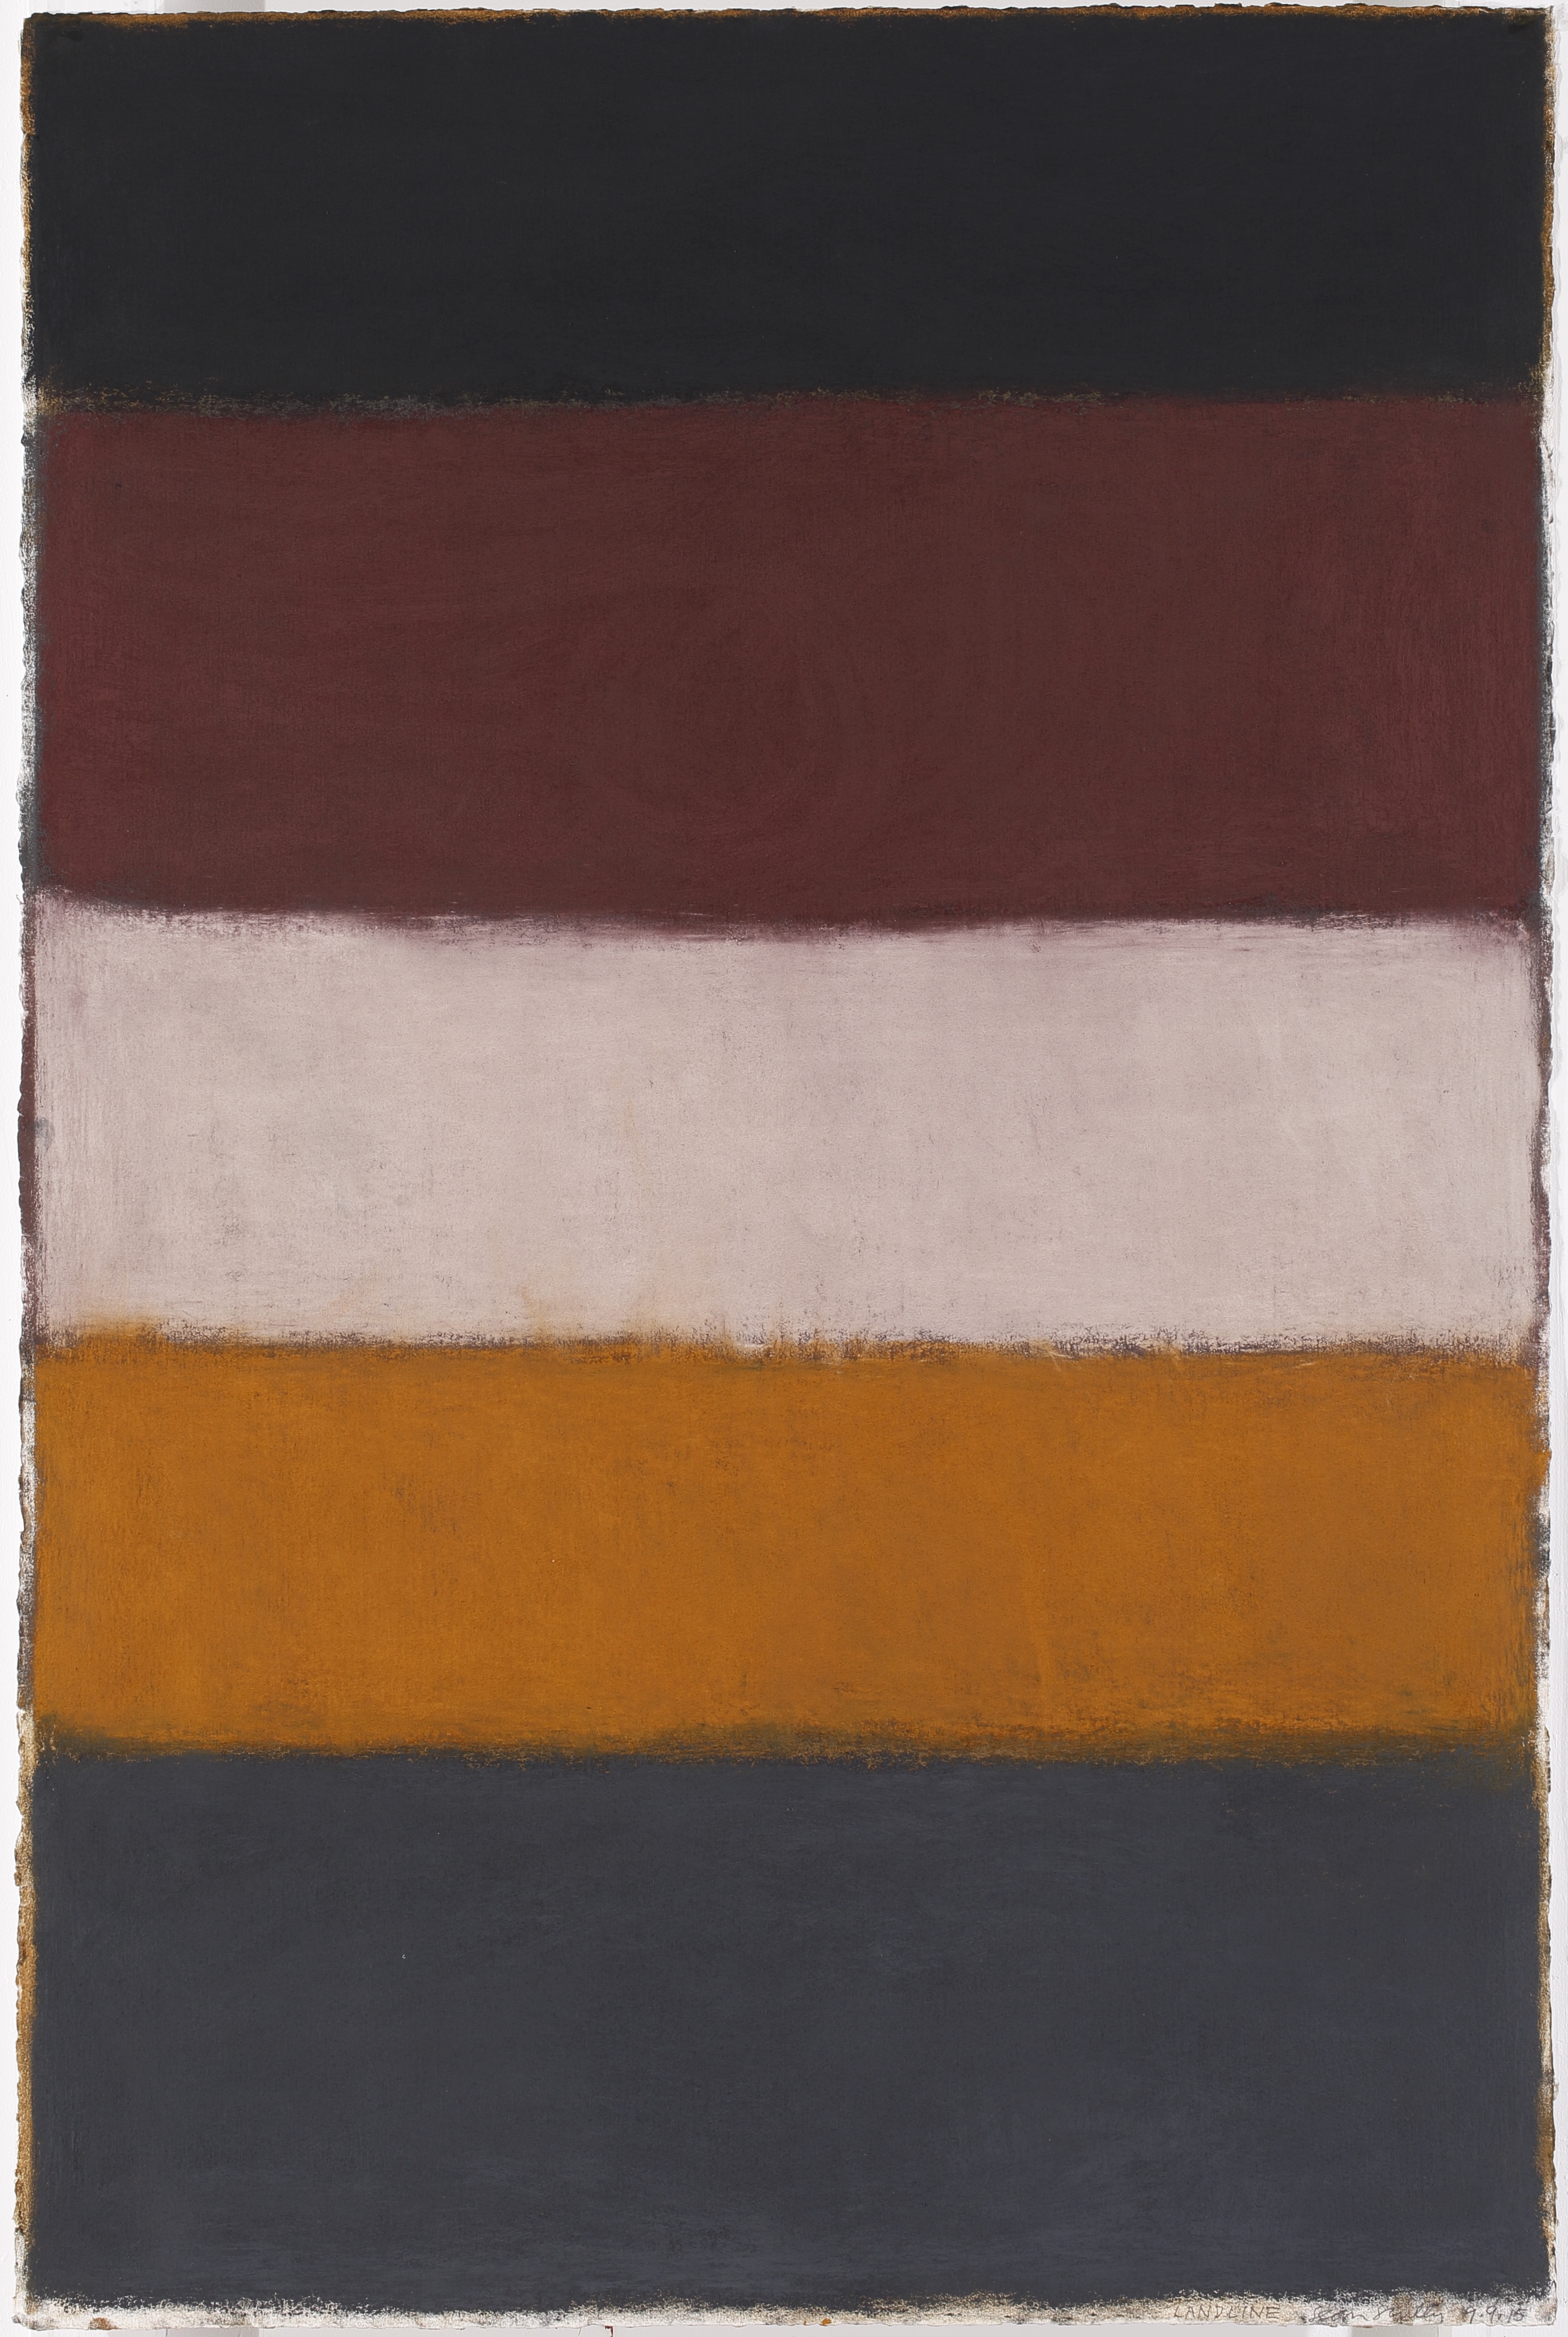 Image: Sean Scully, Landline 9.9.15, 2015. Pastel on paper, 60 x 40” (152.4 x 101.6 cm). Private collection.